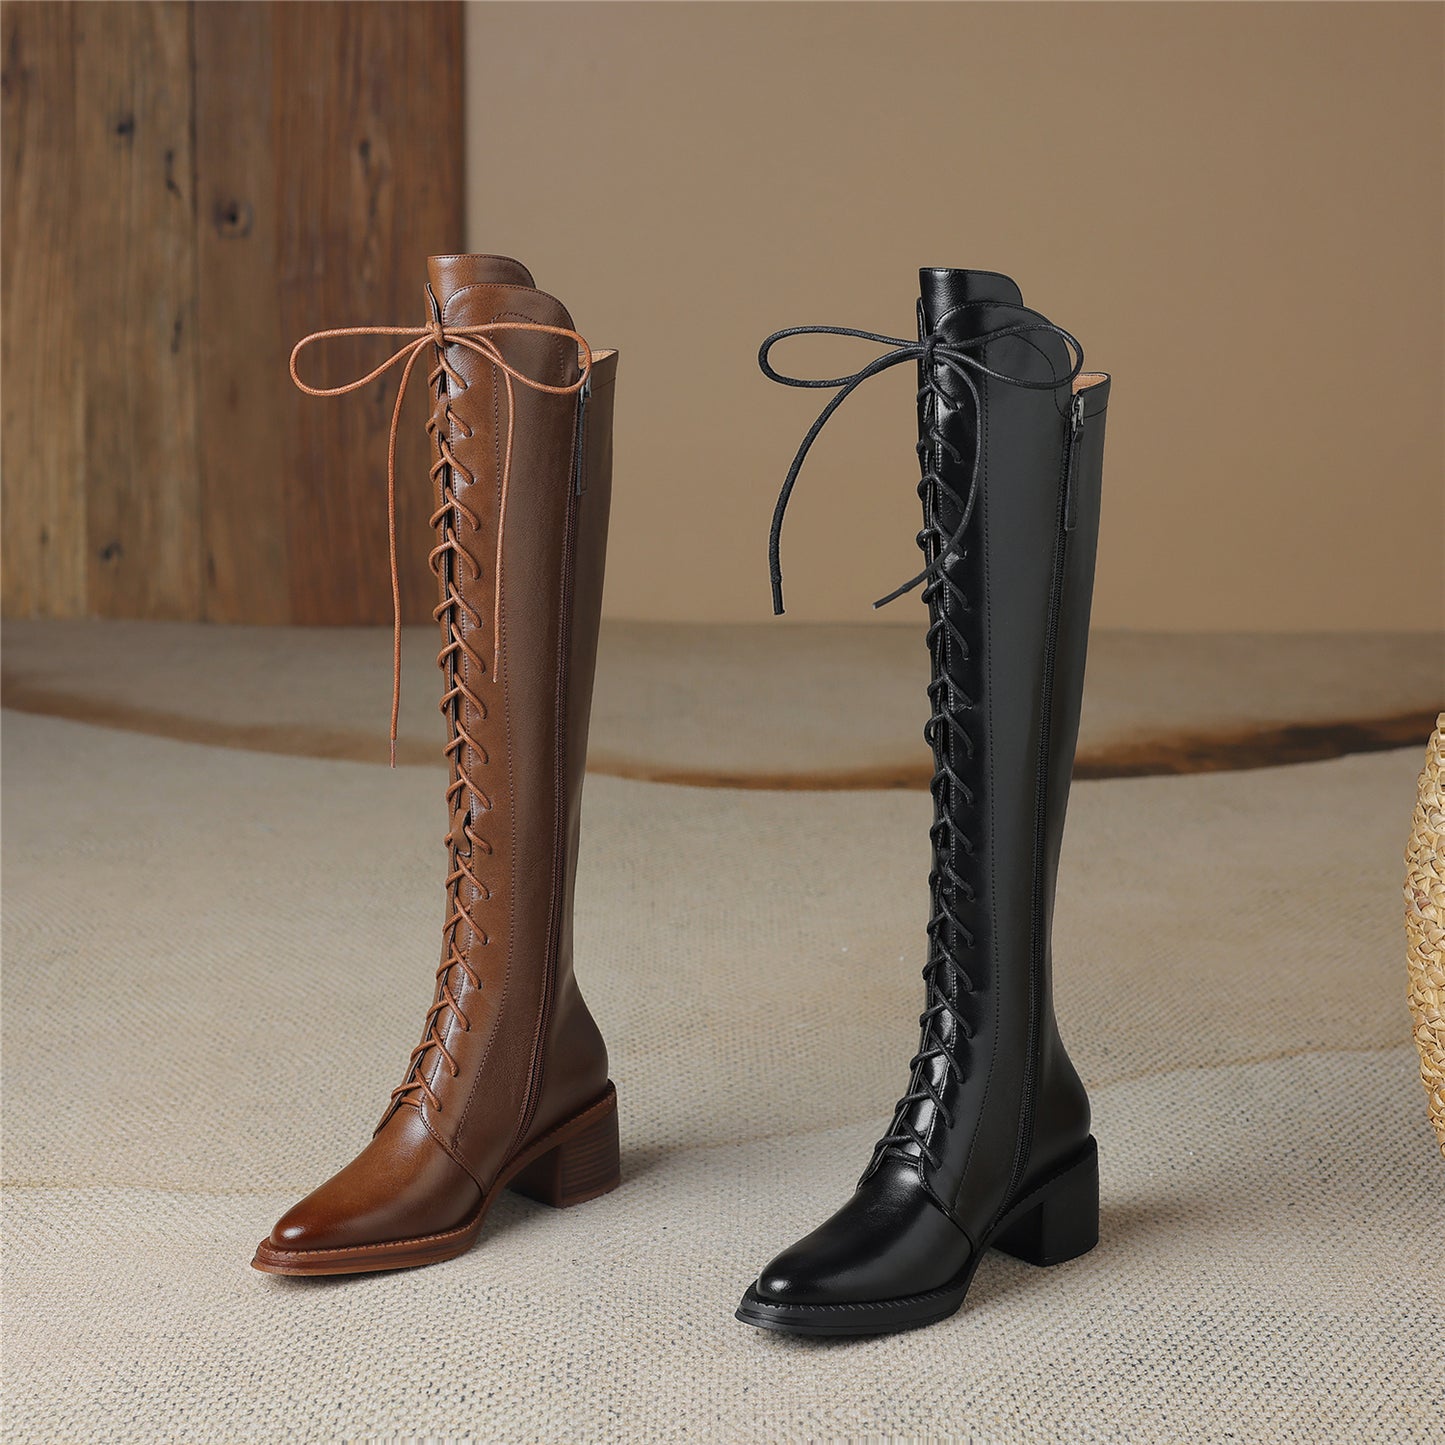 TinaCus Genuine Leather Women's Front Band Pointed Toe Handmade Chunky Heel Zip Up Knee High Boots